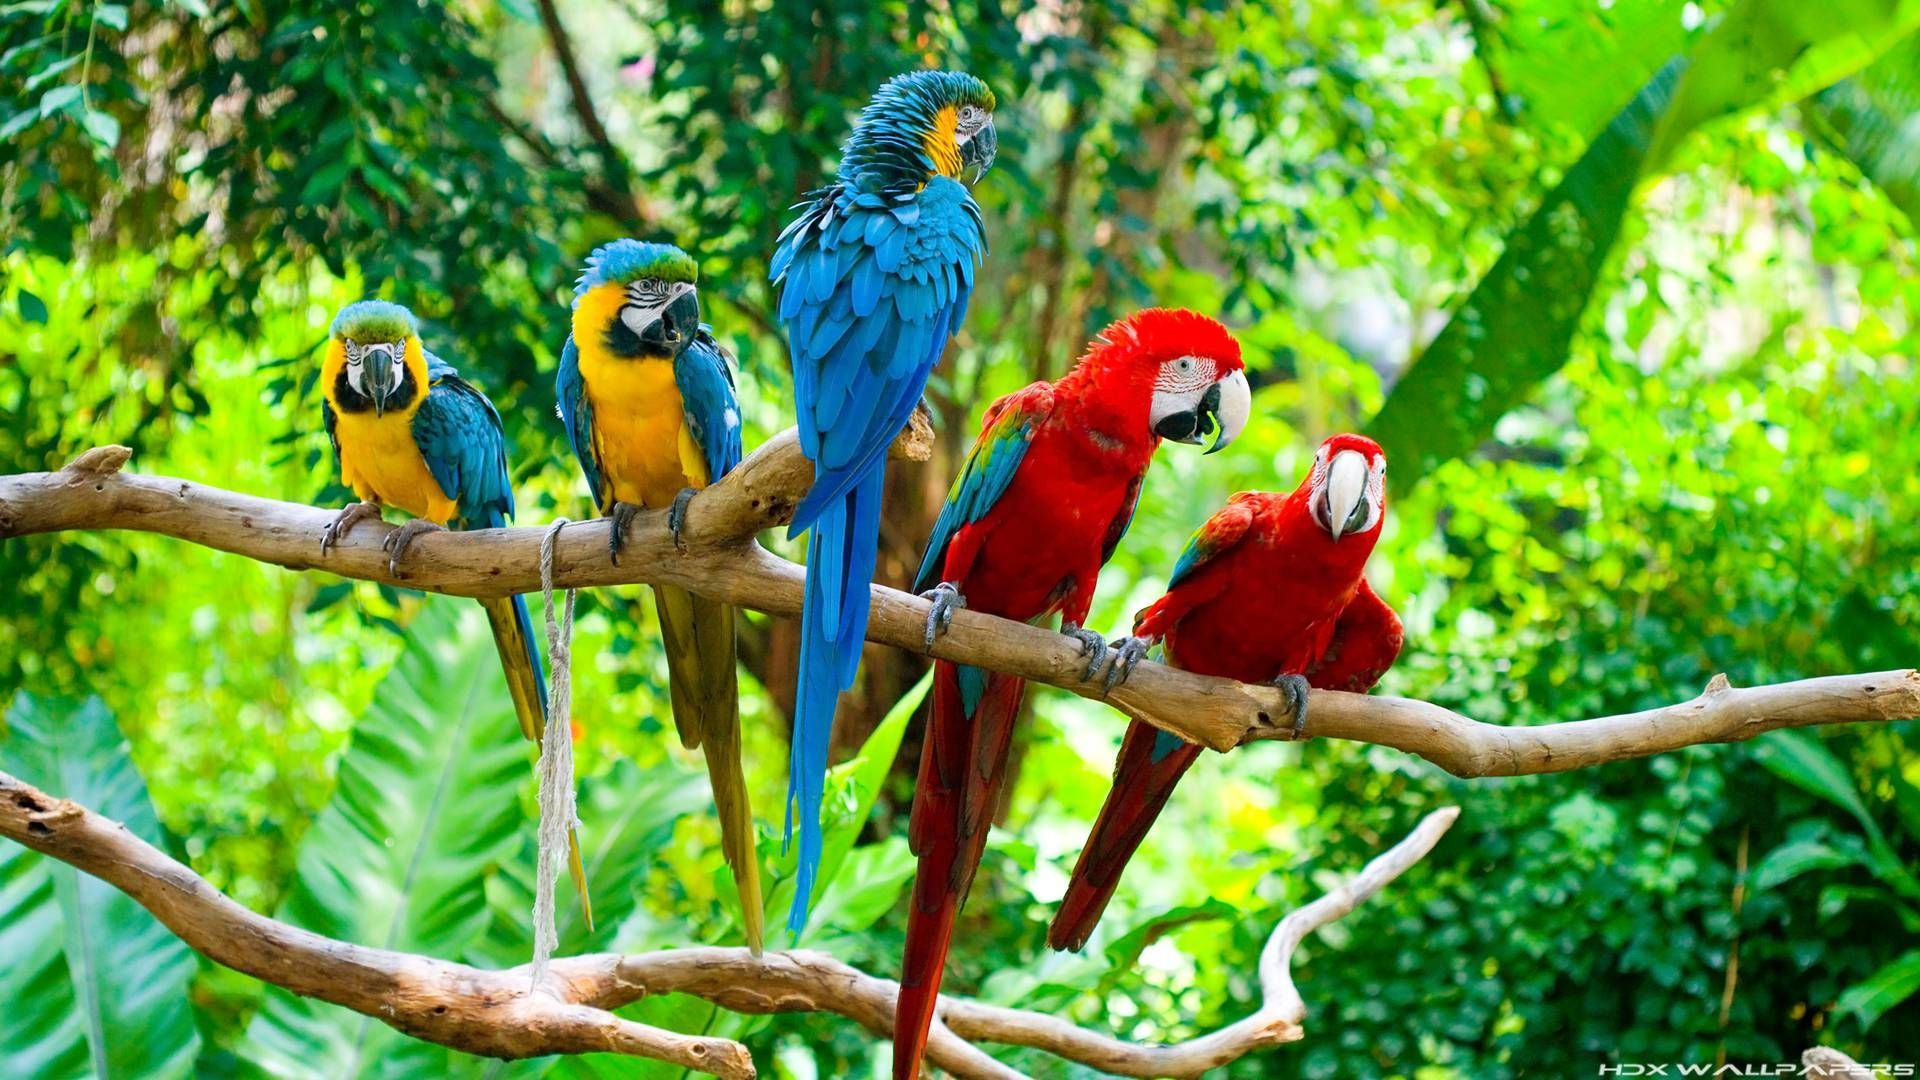 South American Parrot Wallpaper High Quality Resolution. Parrot